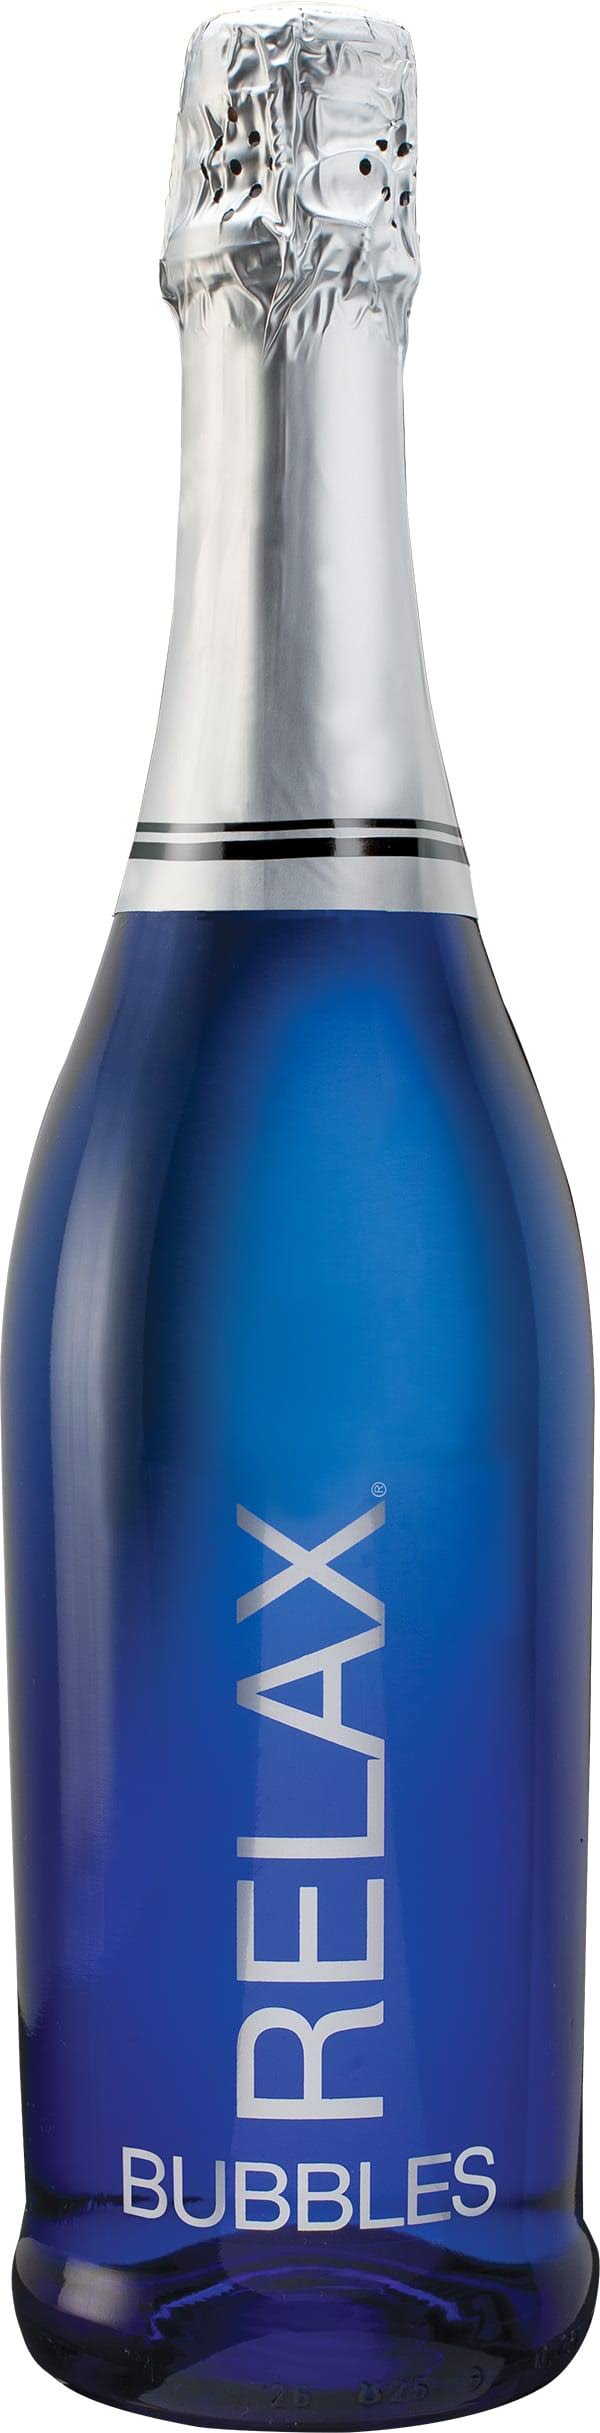 Relax Wines Bubbles - 750 ml